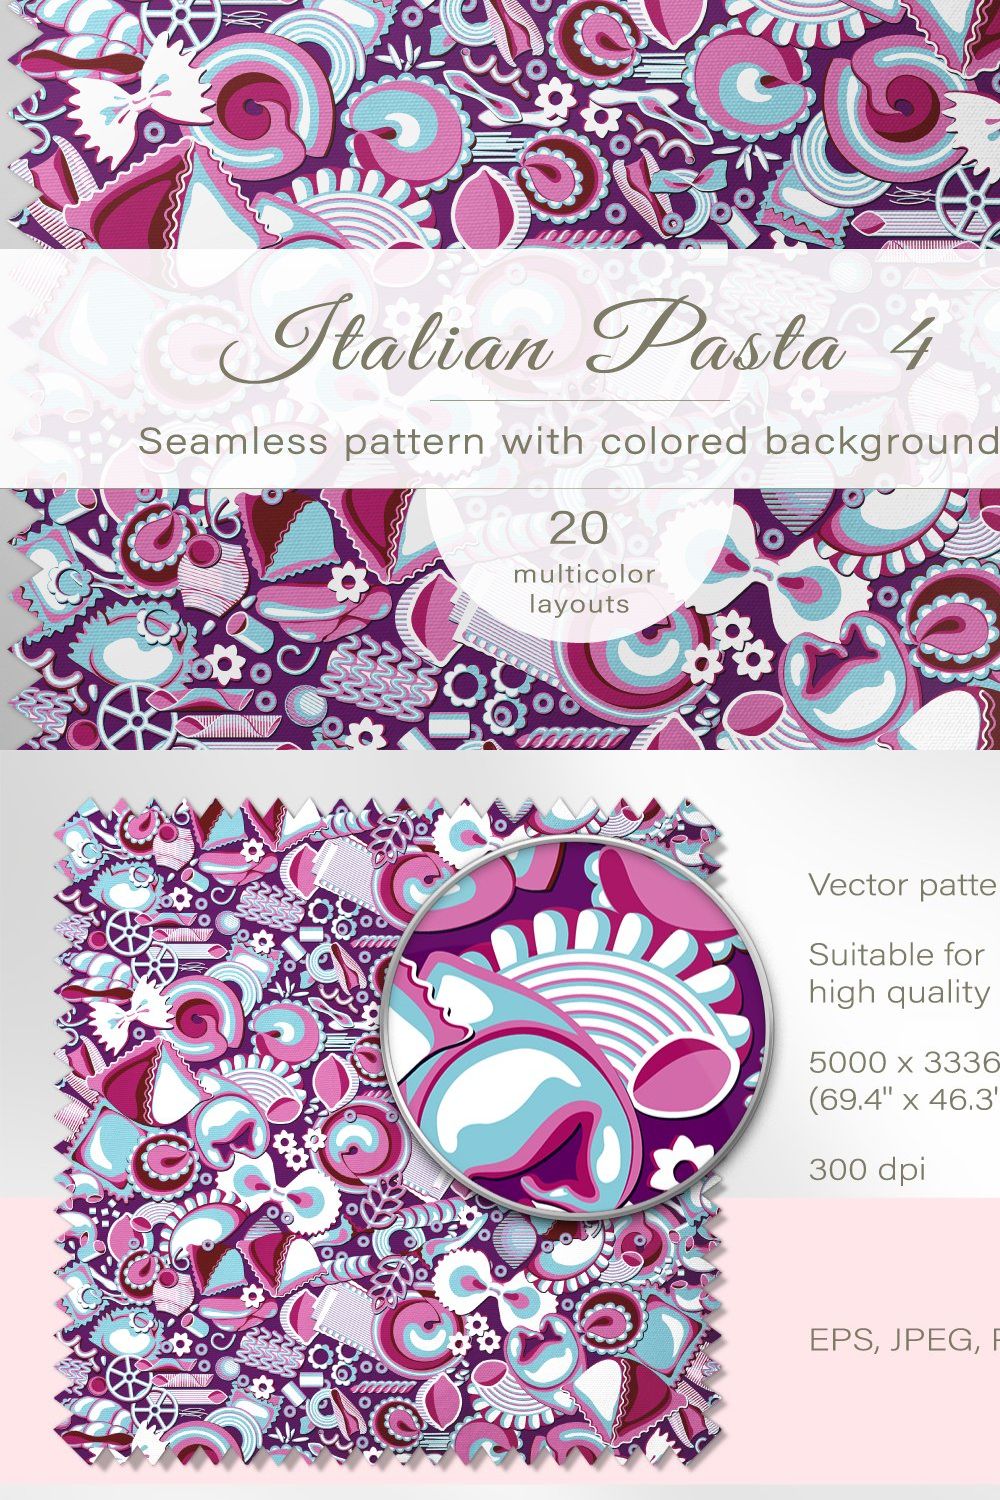 Seamless pattern of Italian pasta 4 pinterest preview image.